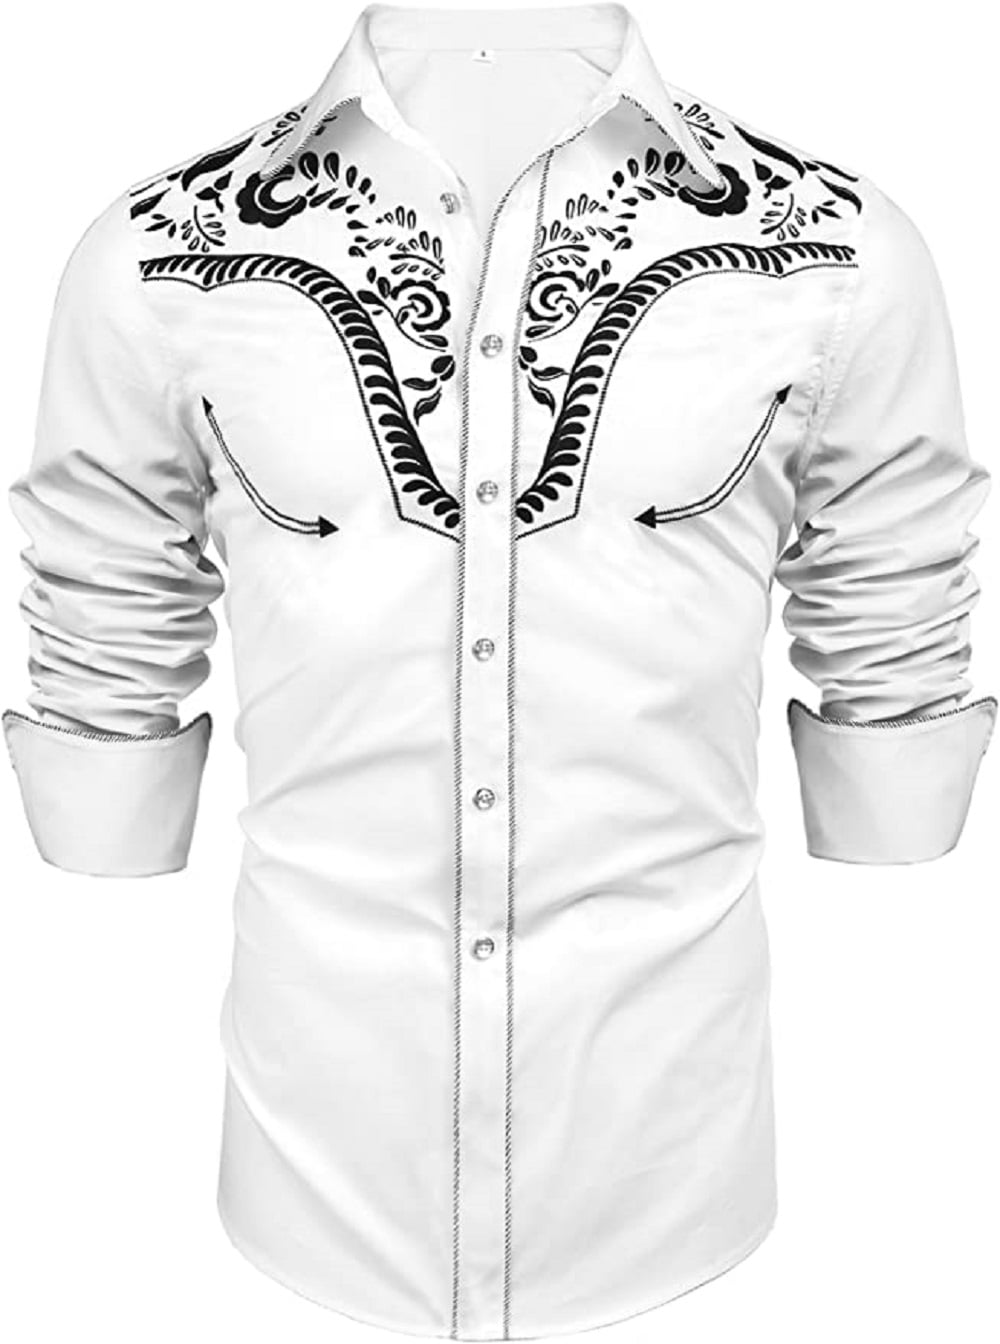 Daupanzees Slim Fit Shirts for Men Button Down Long Sleeve